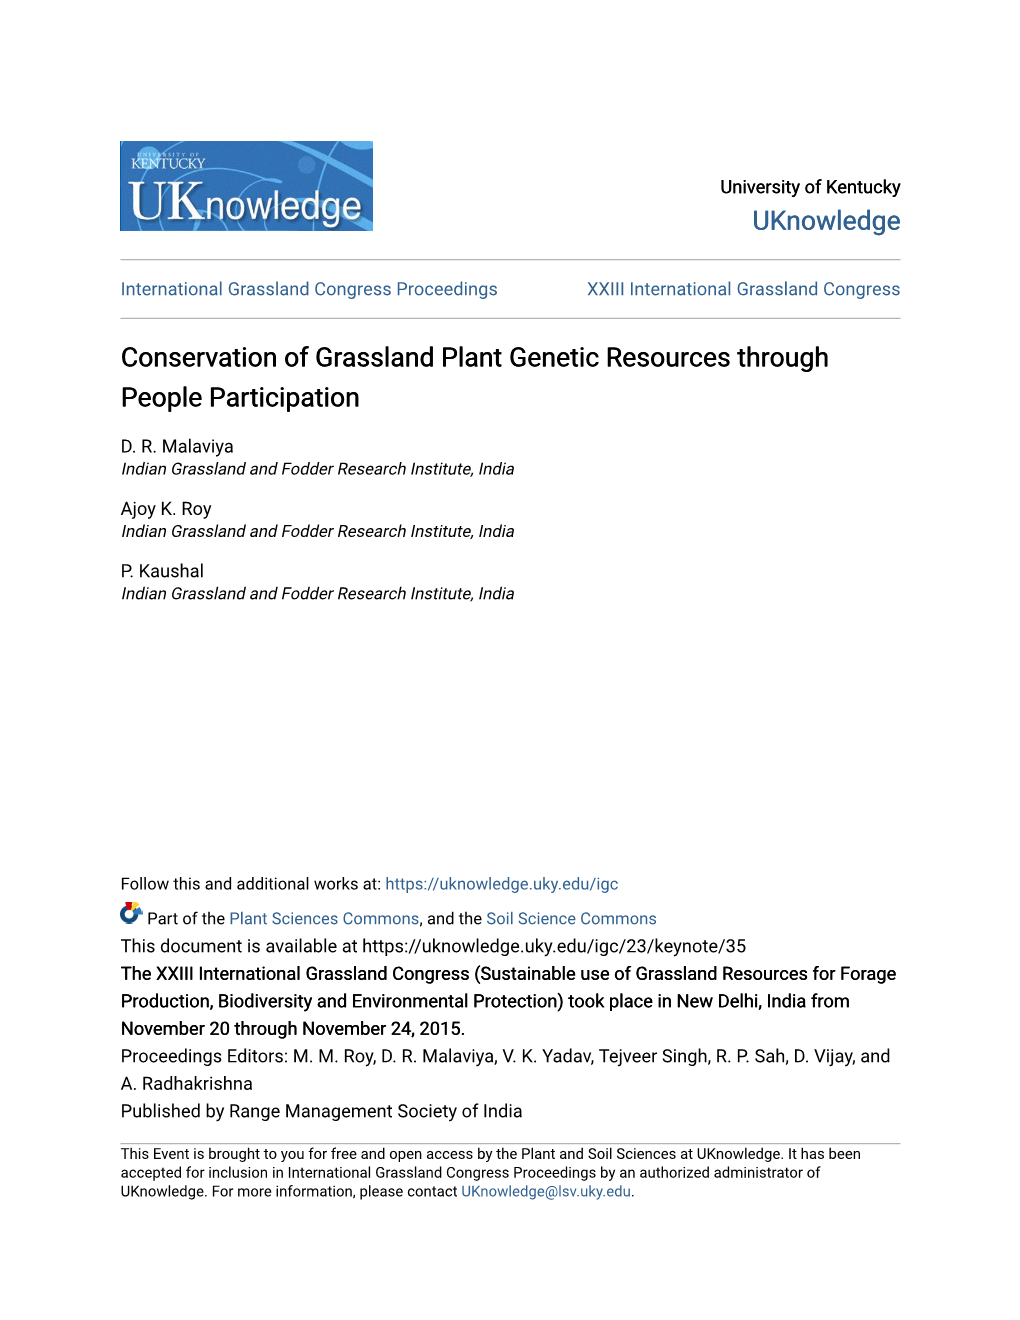 Conservation of Grassland Plant Genetic Resources Through People Participation